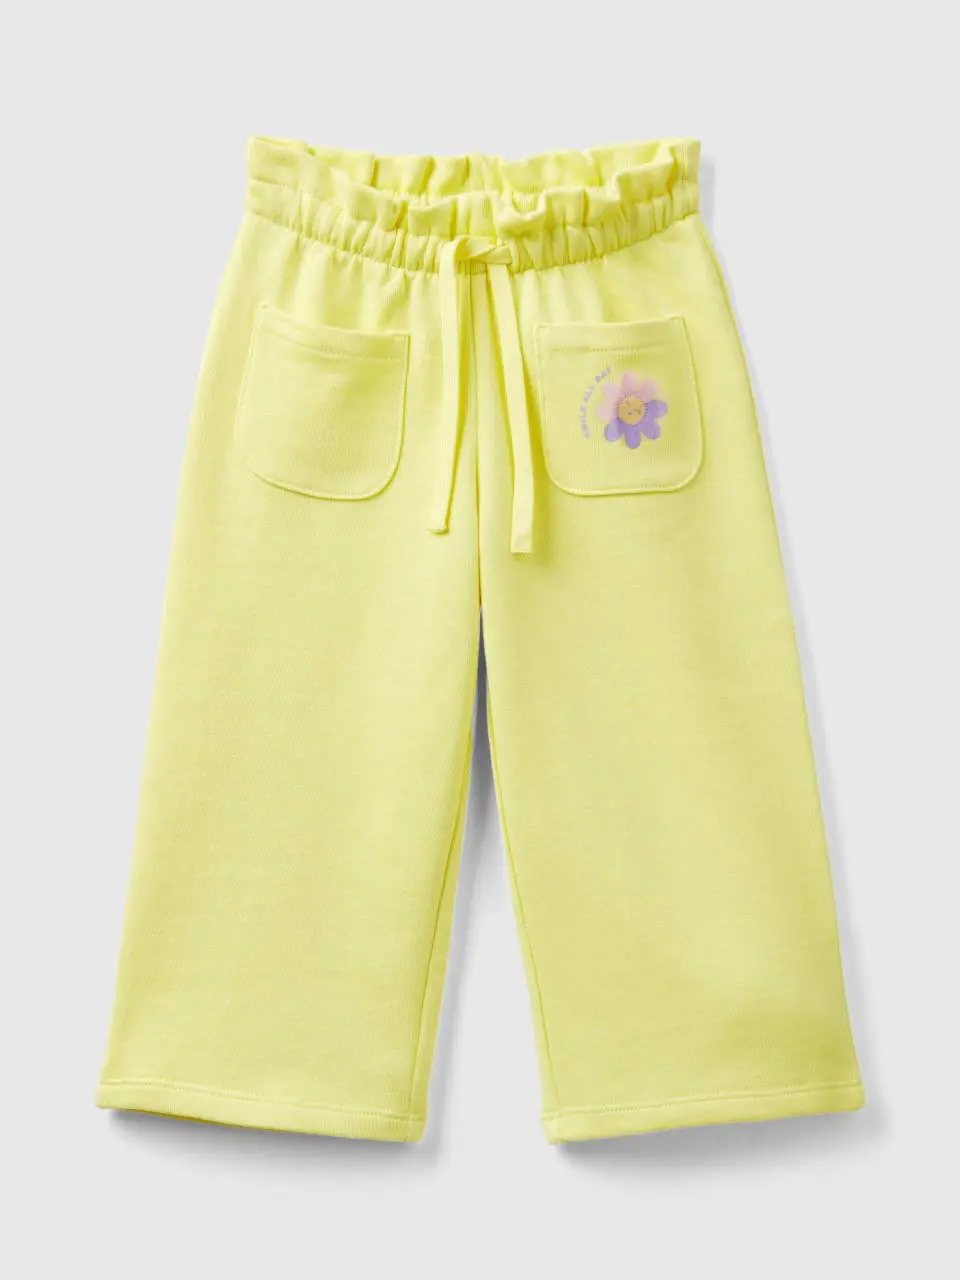 Benetton cropped fit sweatpants. 1